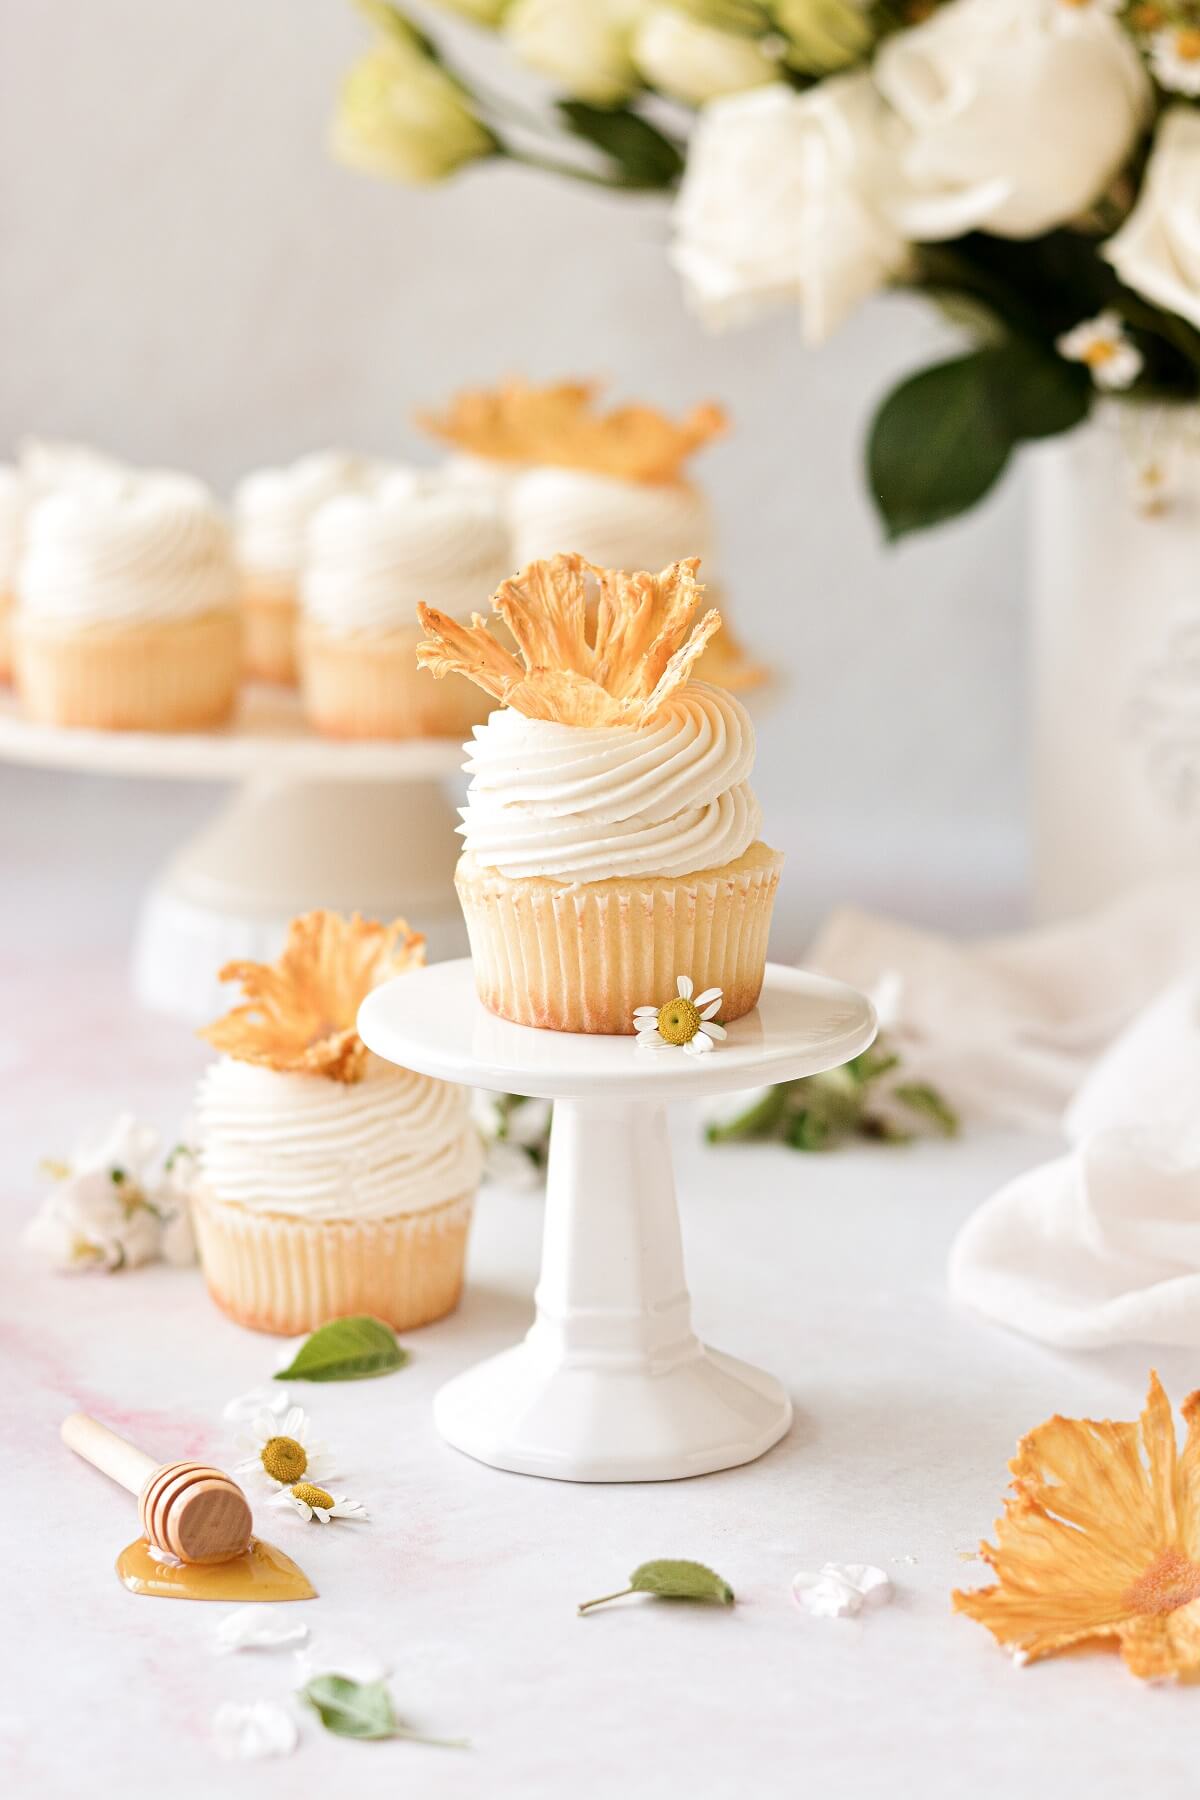 Honey lemon cupcakes topped with dried pineapple flowers.